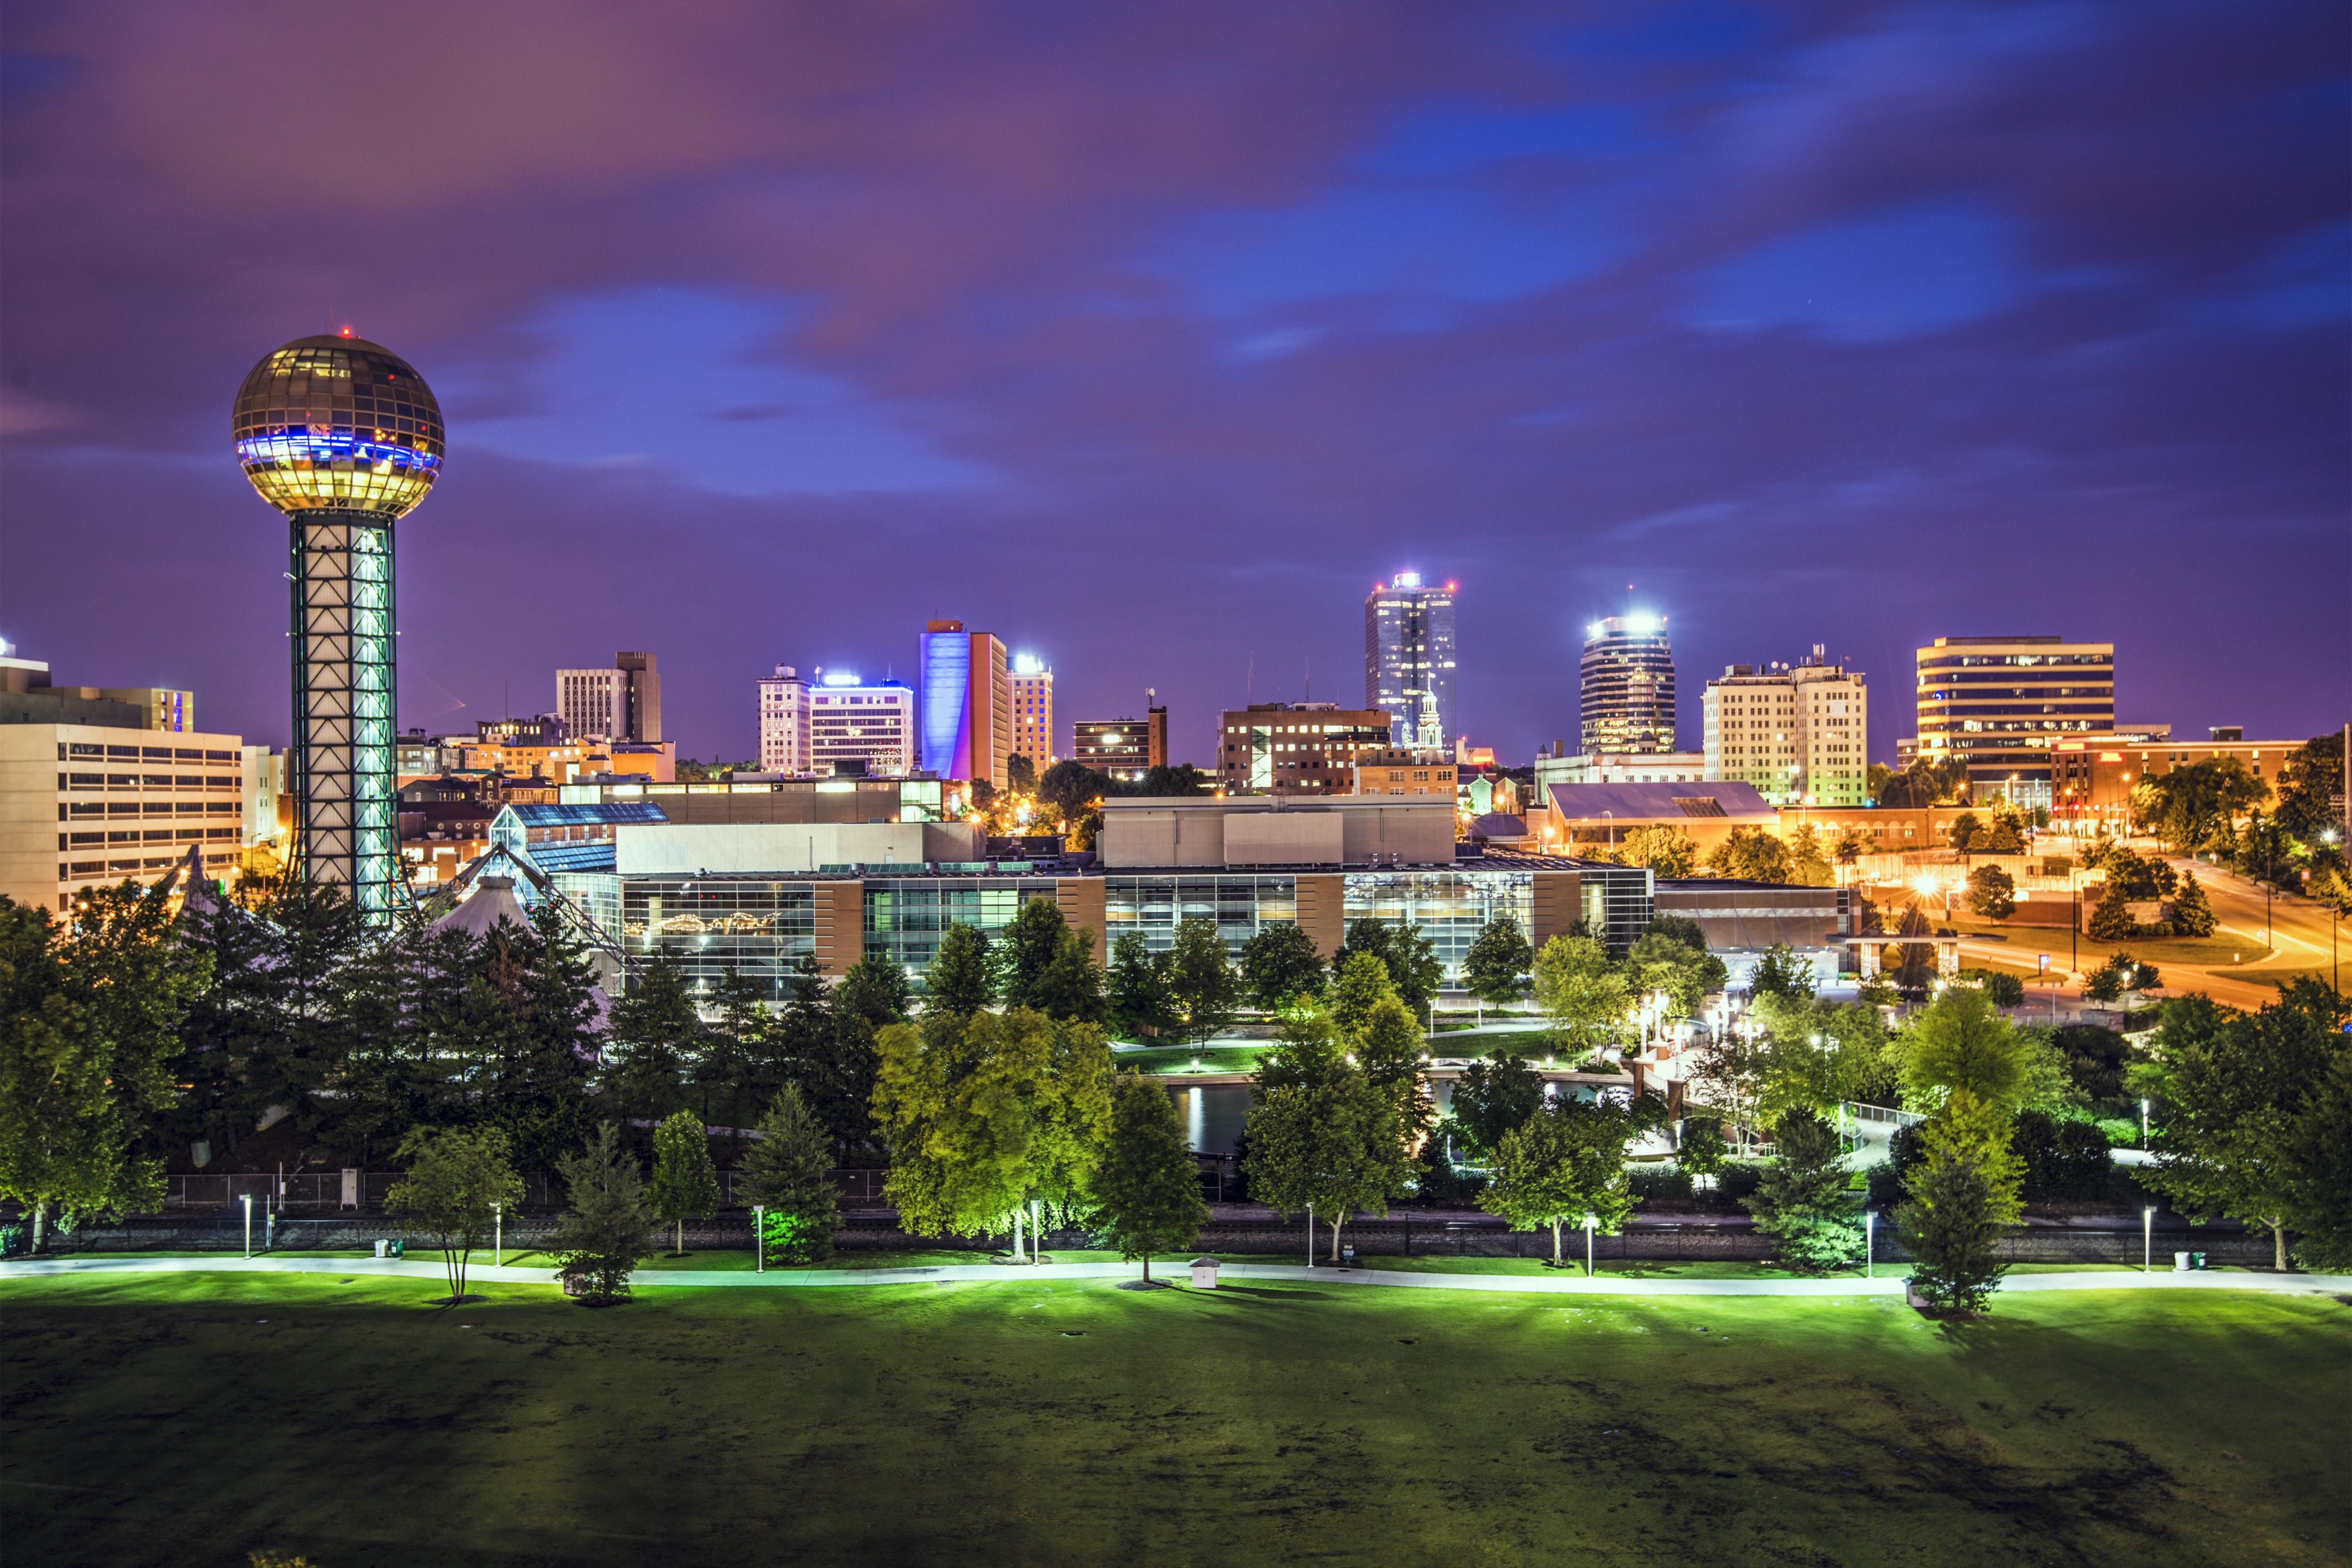 Explore everything there is to do in Downtown Knoxville.